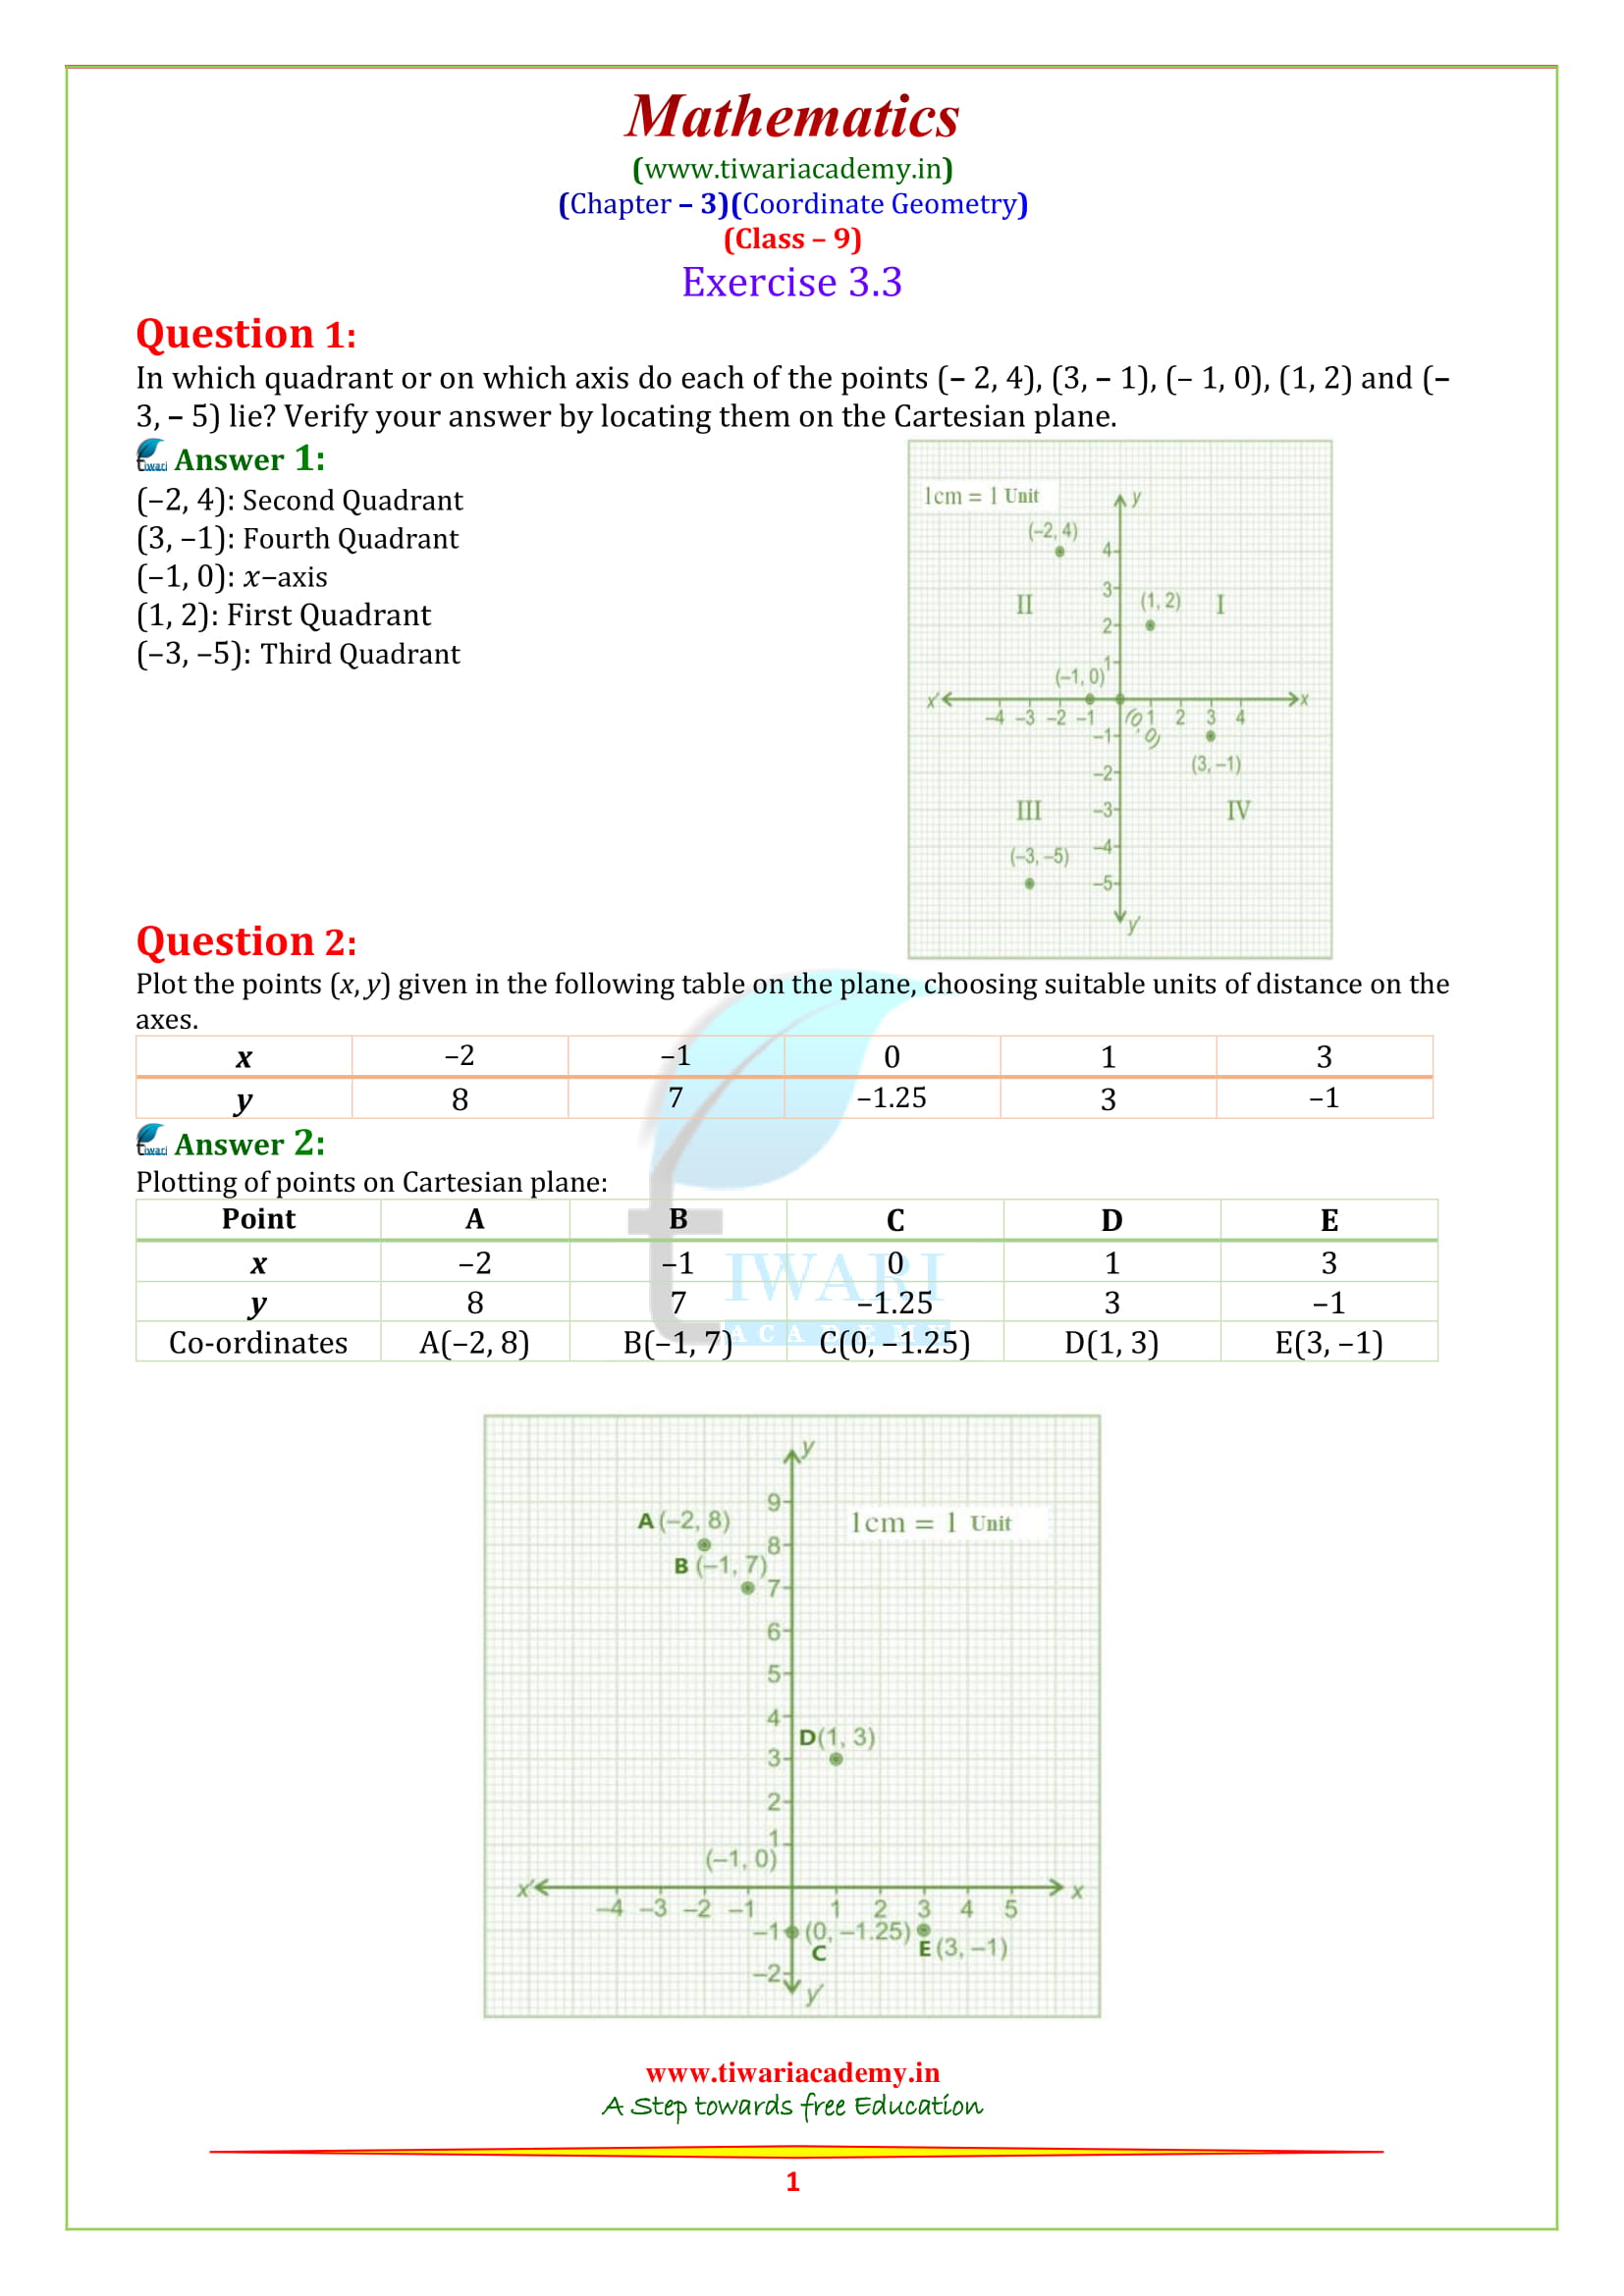 9 Maths Exercise 3.3 solutions